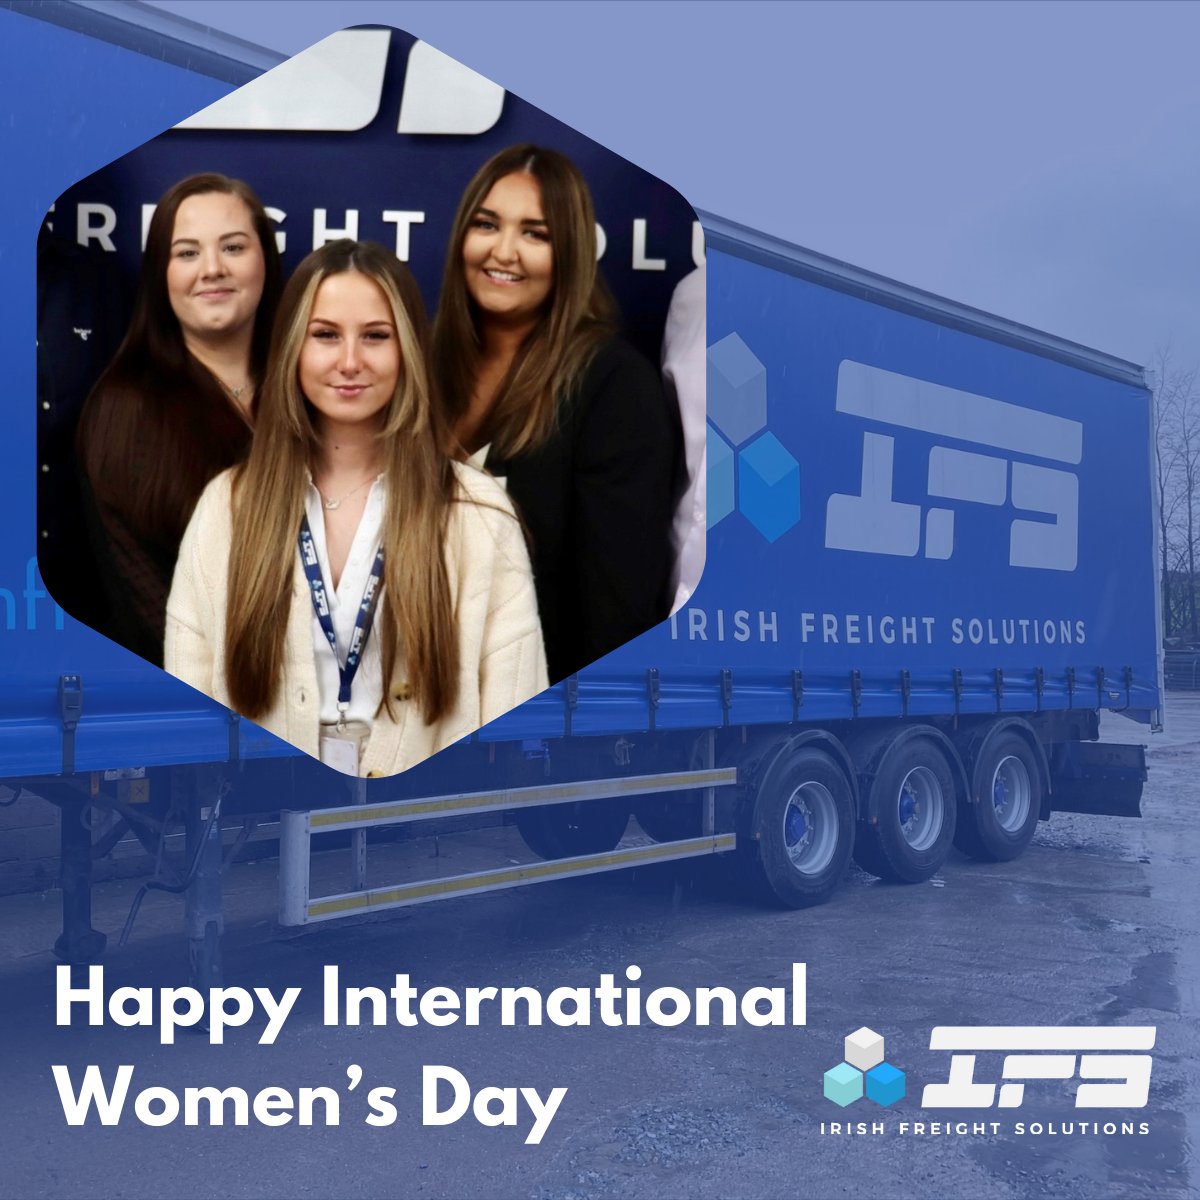 At Irish Freight Solutions, we are so proud of the hard-working, dedicated women who are part of our team. Their efforts in roles across the company are invaluable in enabling us to succeed and grow every year.